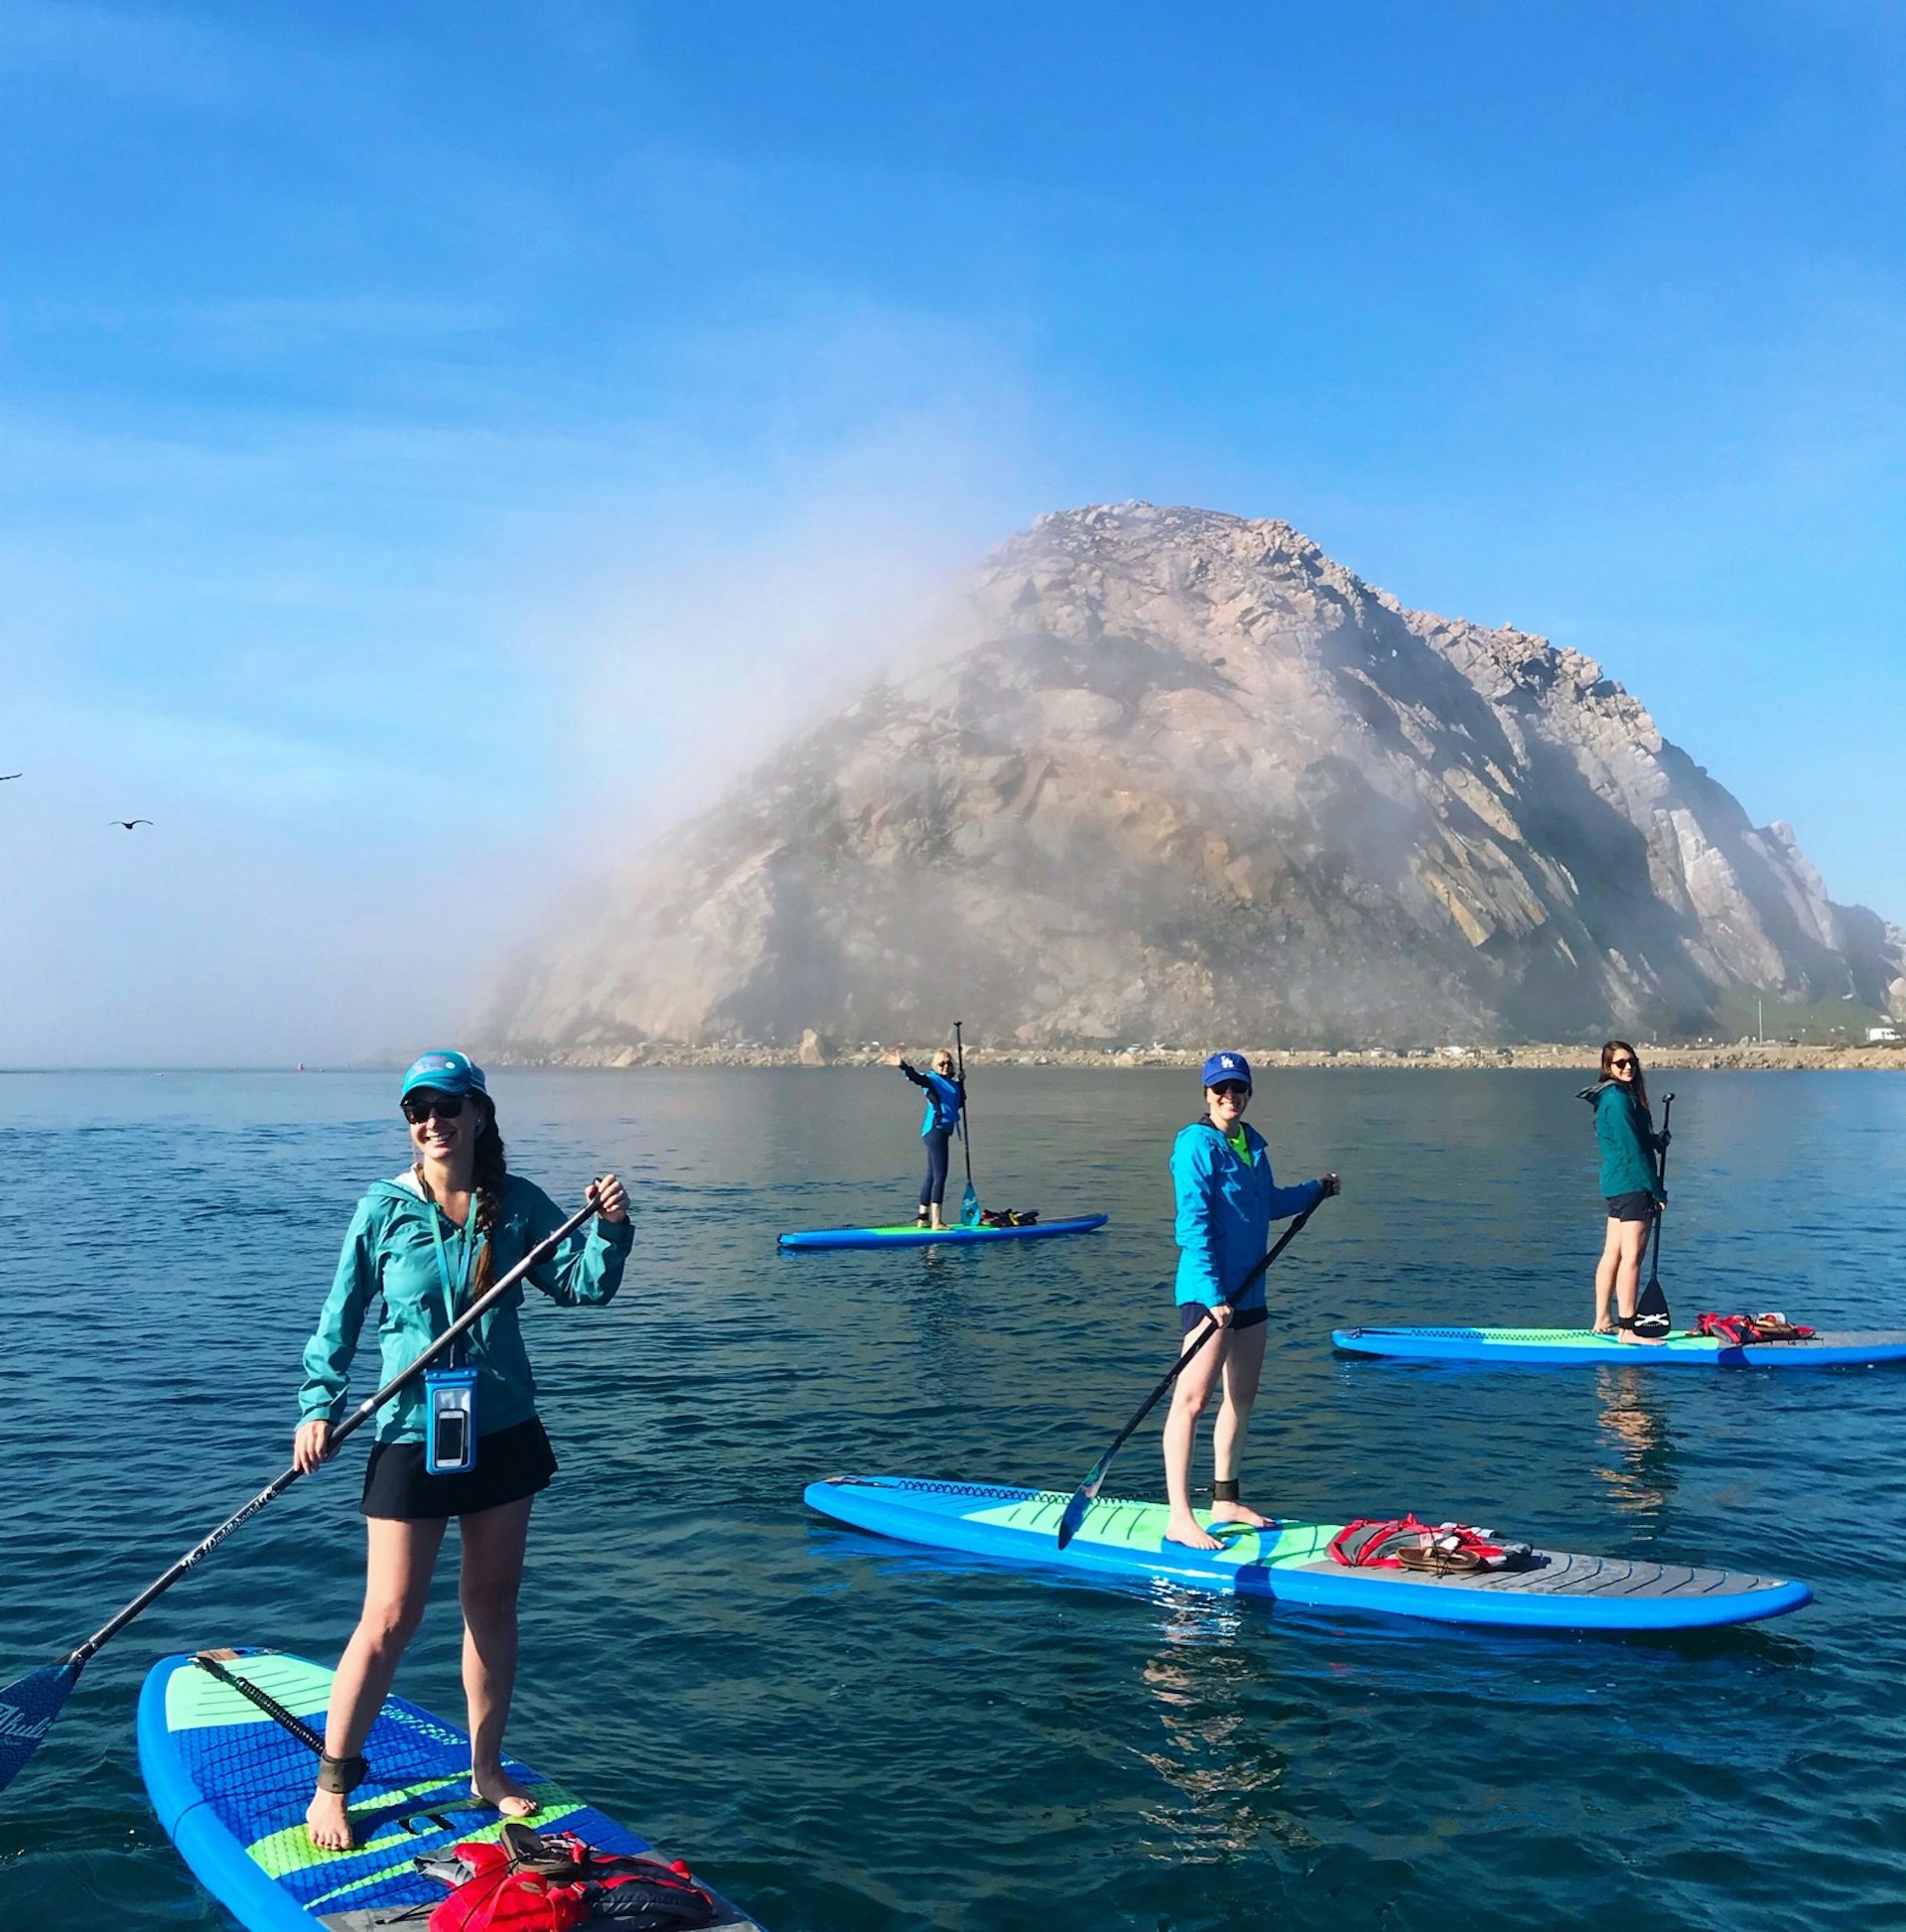 Morro Rock stands out in Morro Bay, covered in fog, as a group of paddleboarders in blue jackets explores the water around it